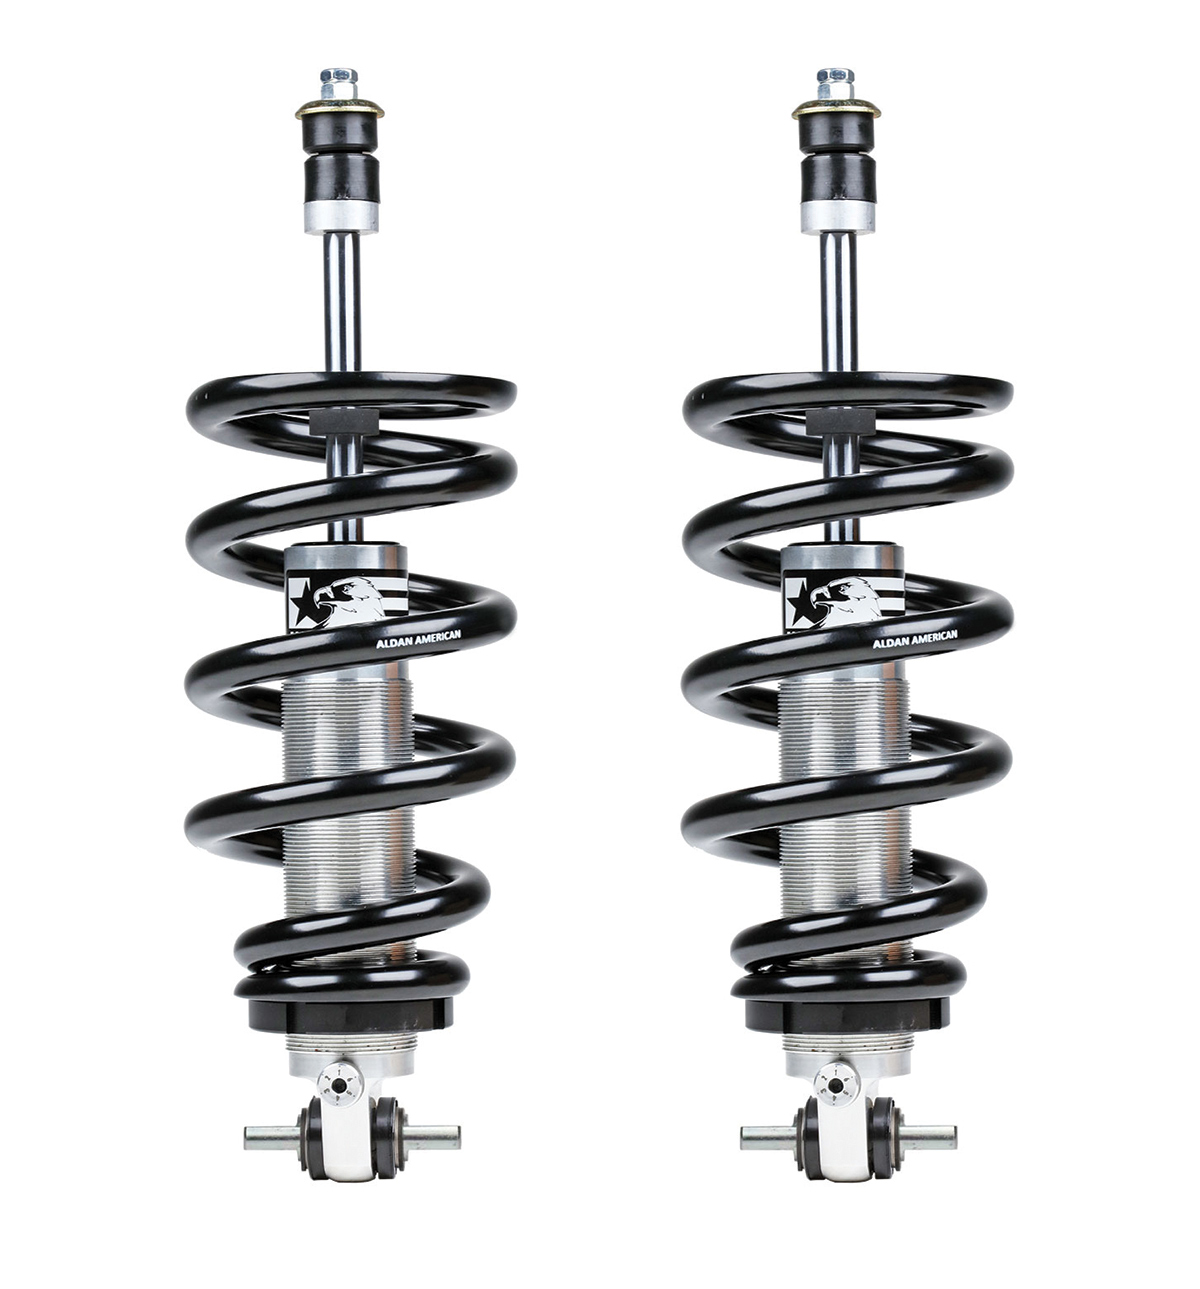 Photo of a pair of springs that are mounted on single-adjustable shocks